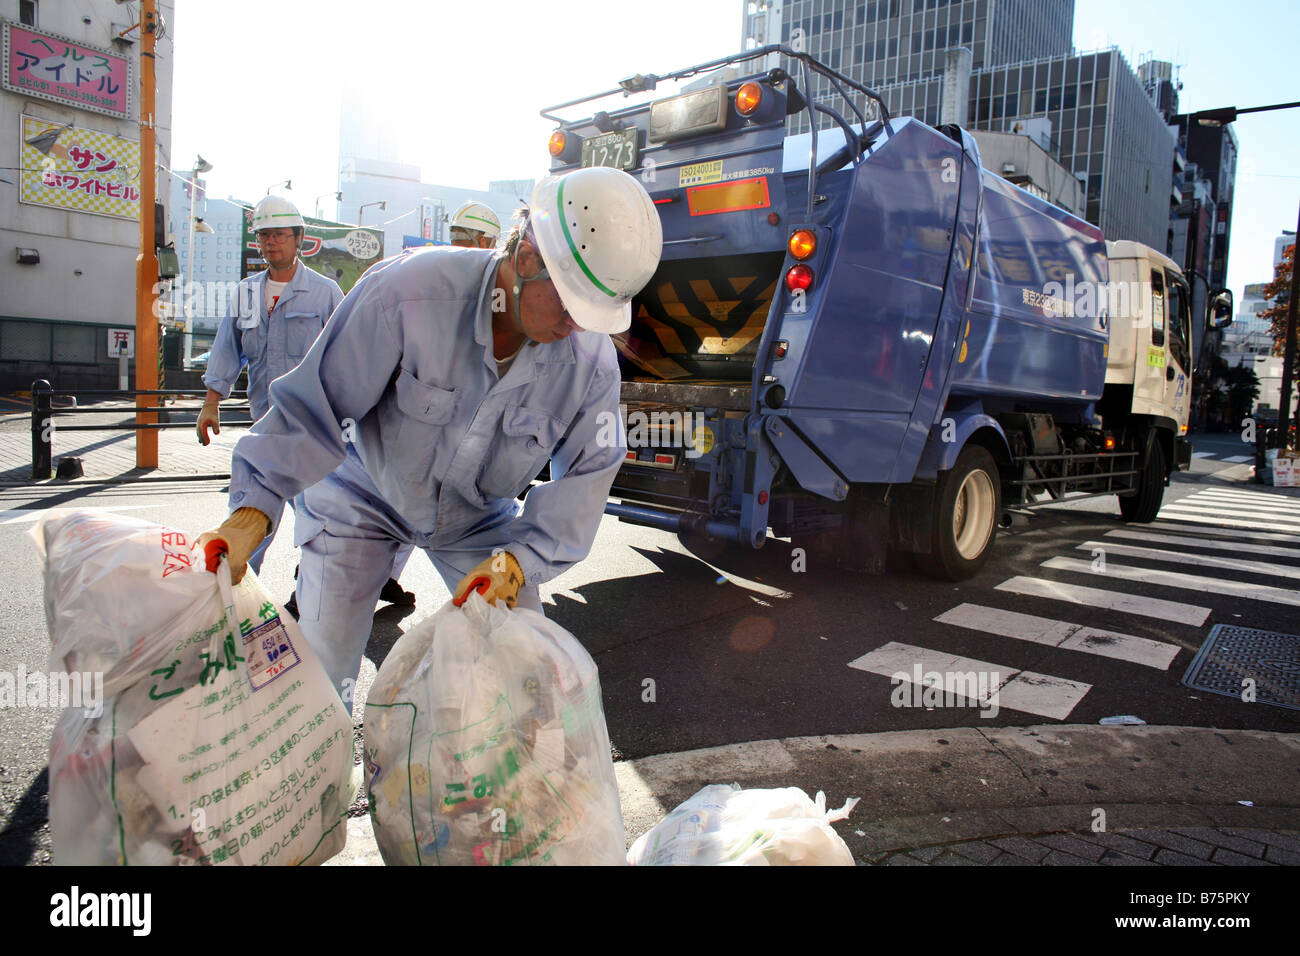 What is the job description of a garbage collector?